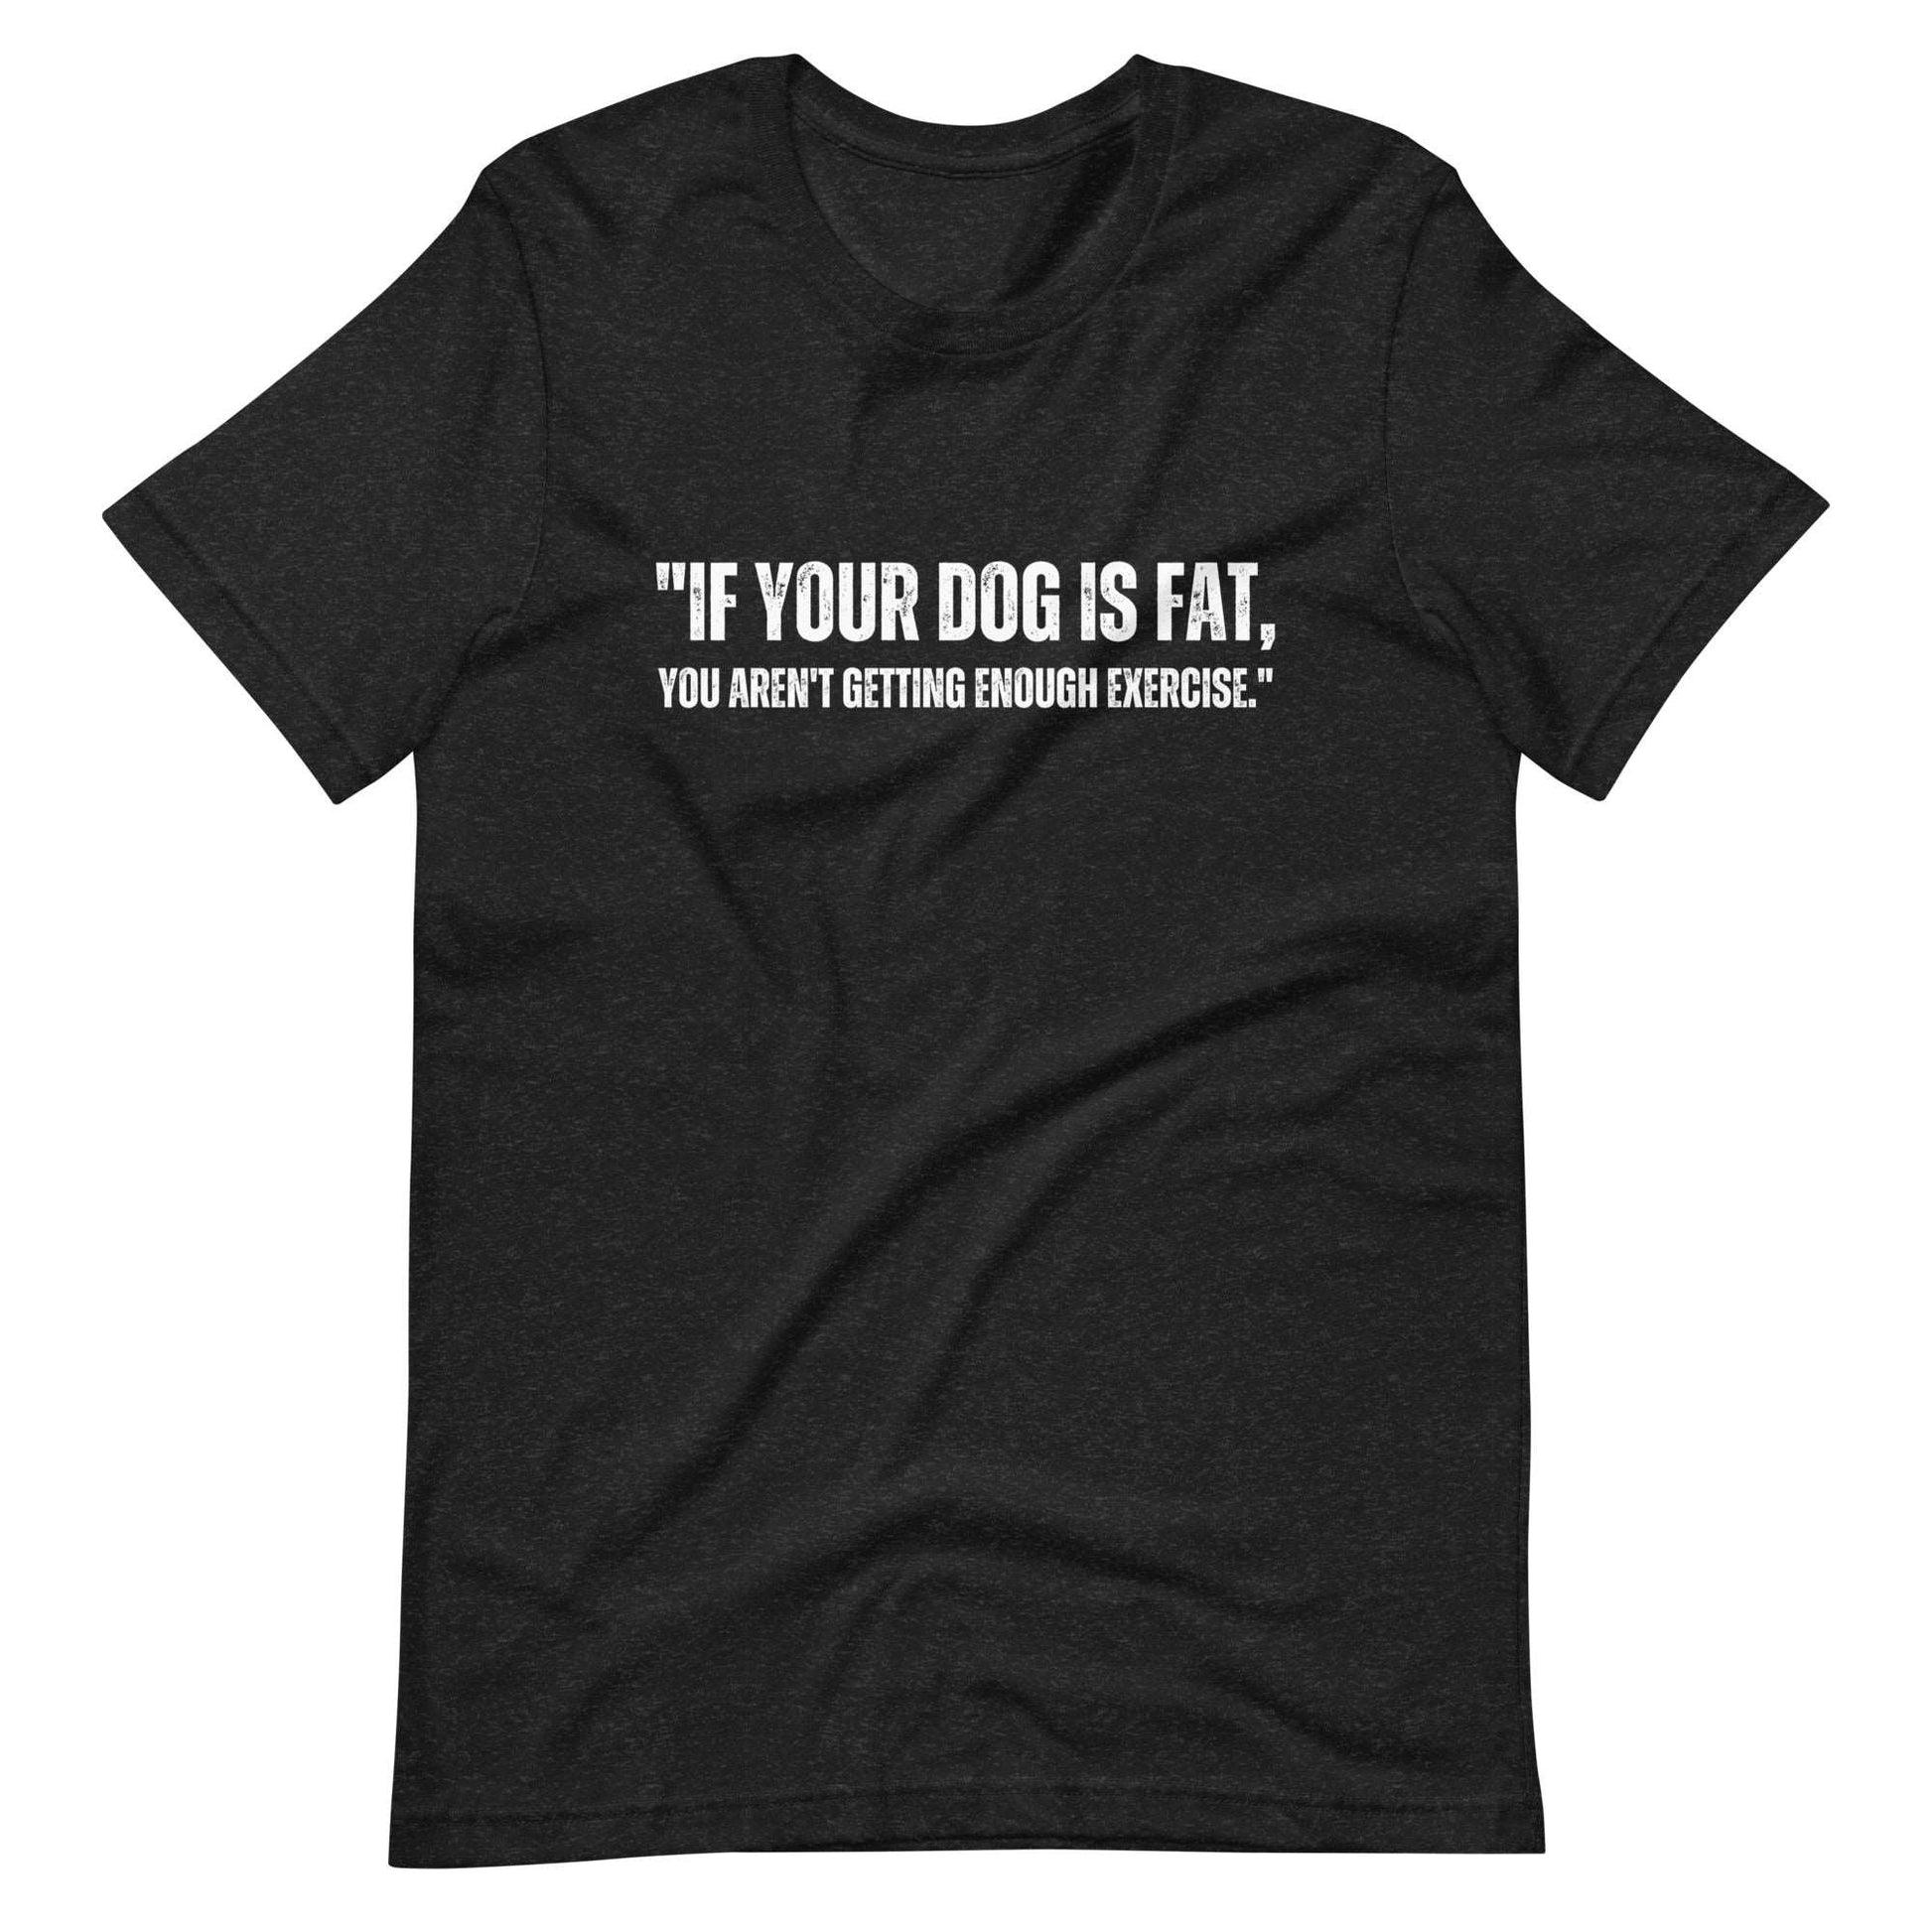 If your dog is fat Unisex t-shirt